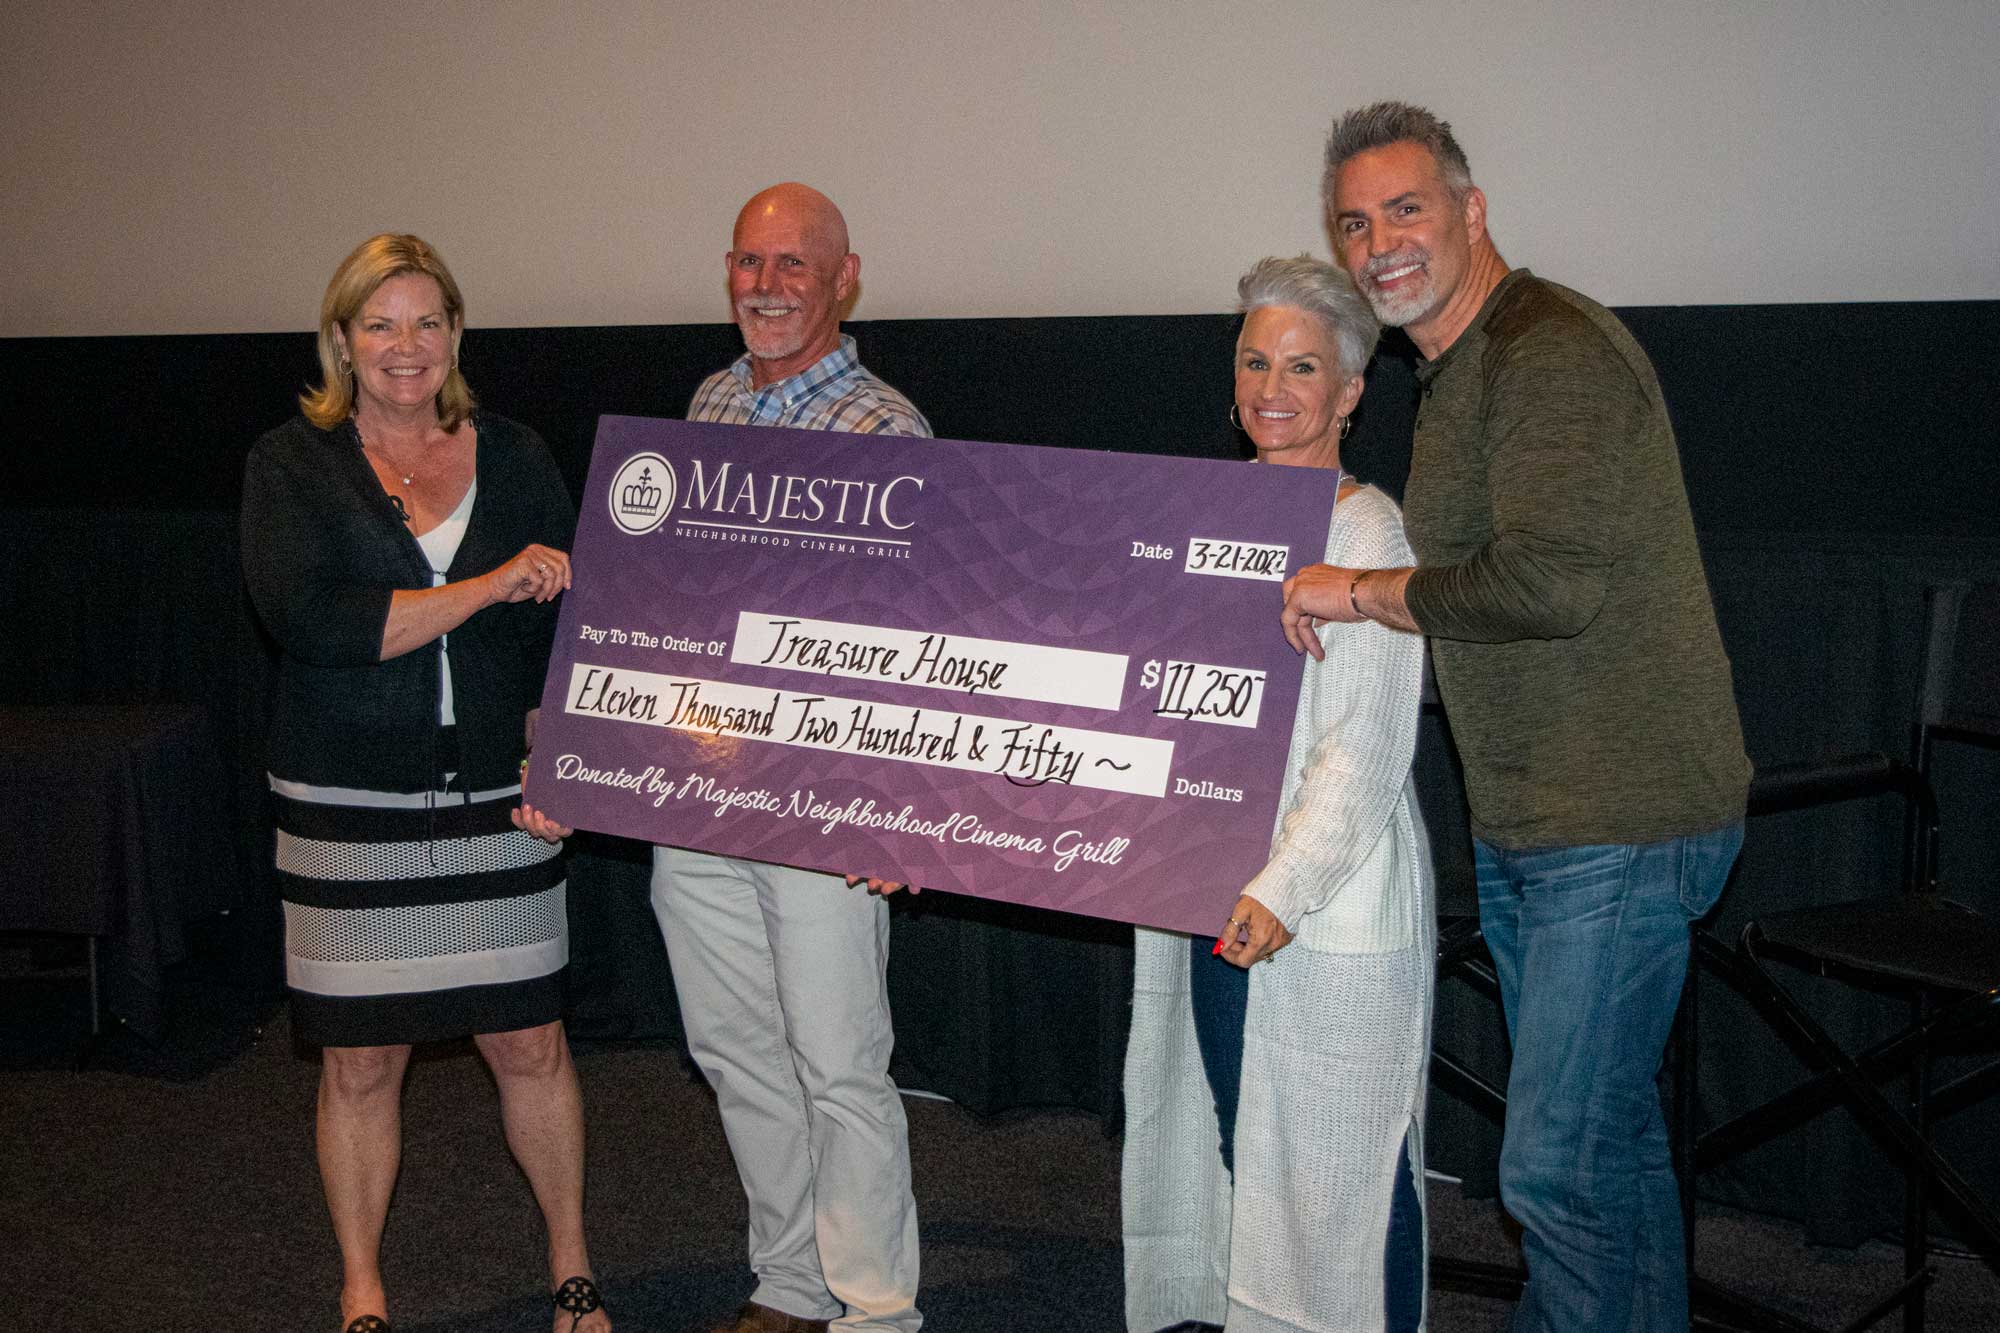 People holding a large check from Majestic, to Treasure House